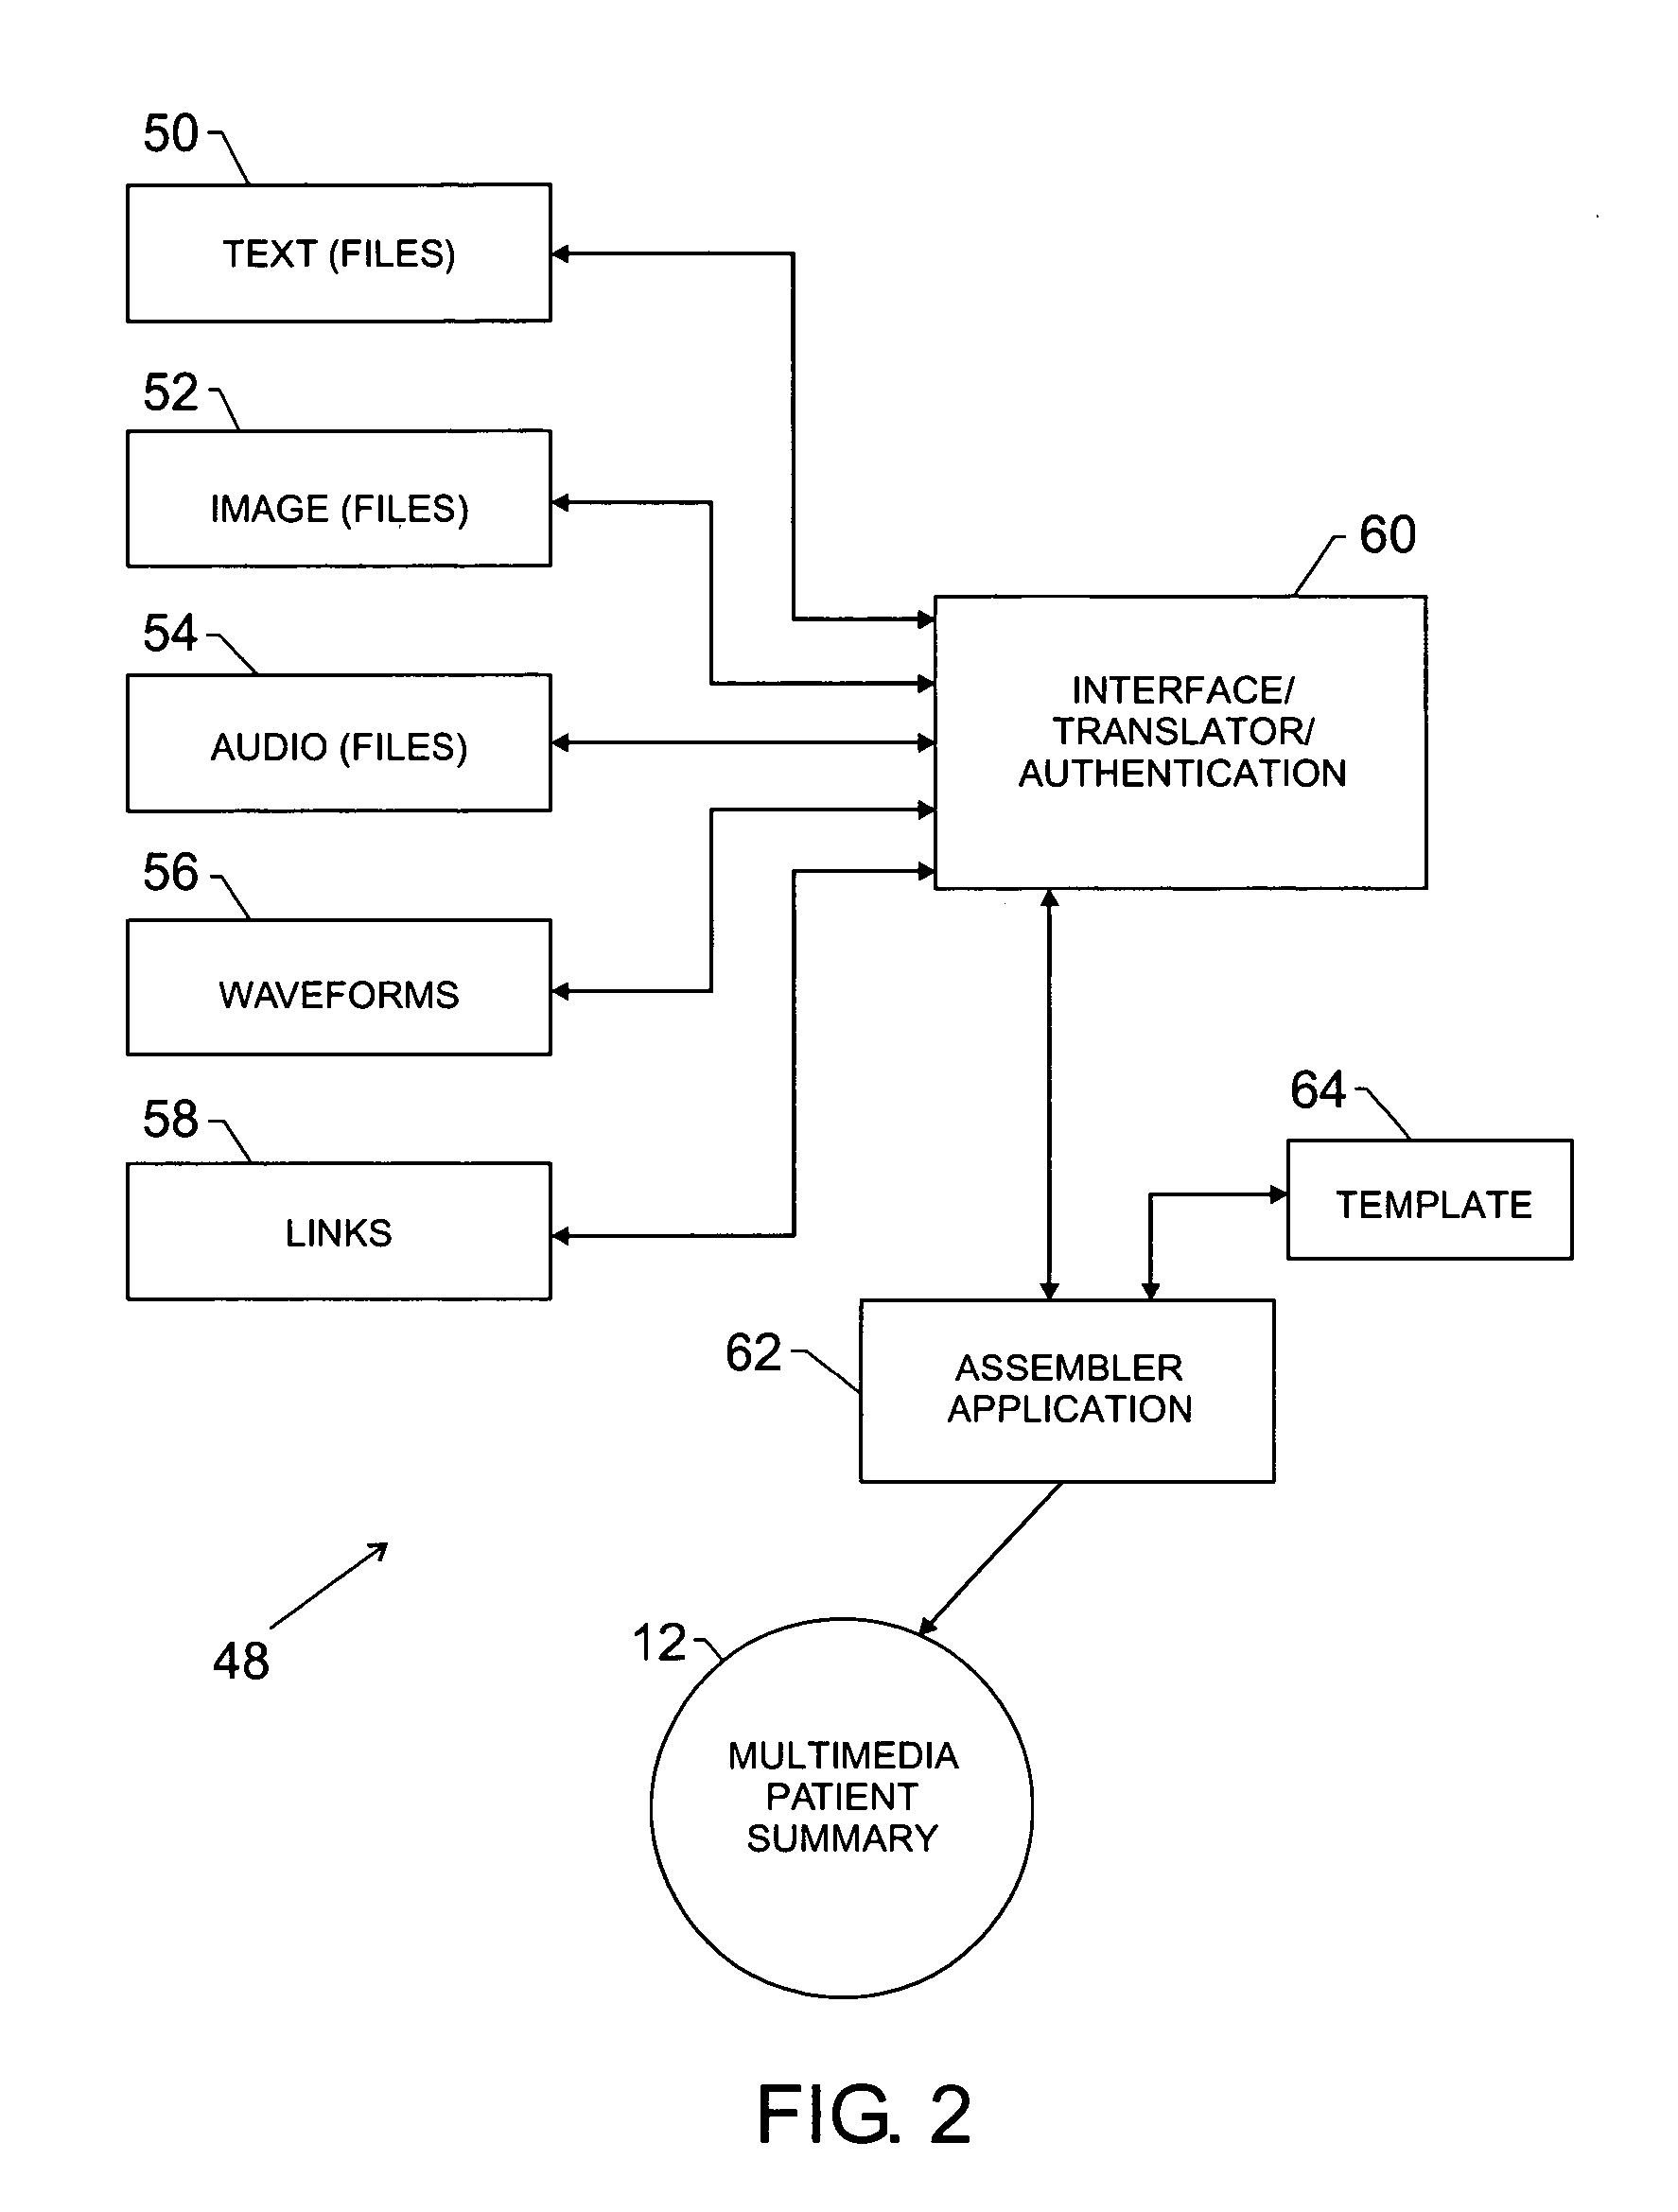 Method and apparatus for constructing and viewing a multi-media patient summary